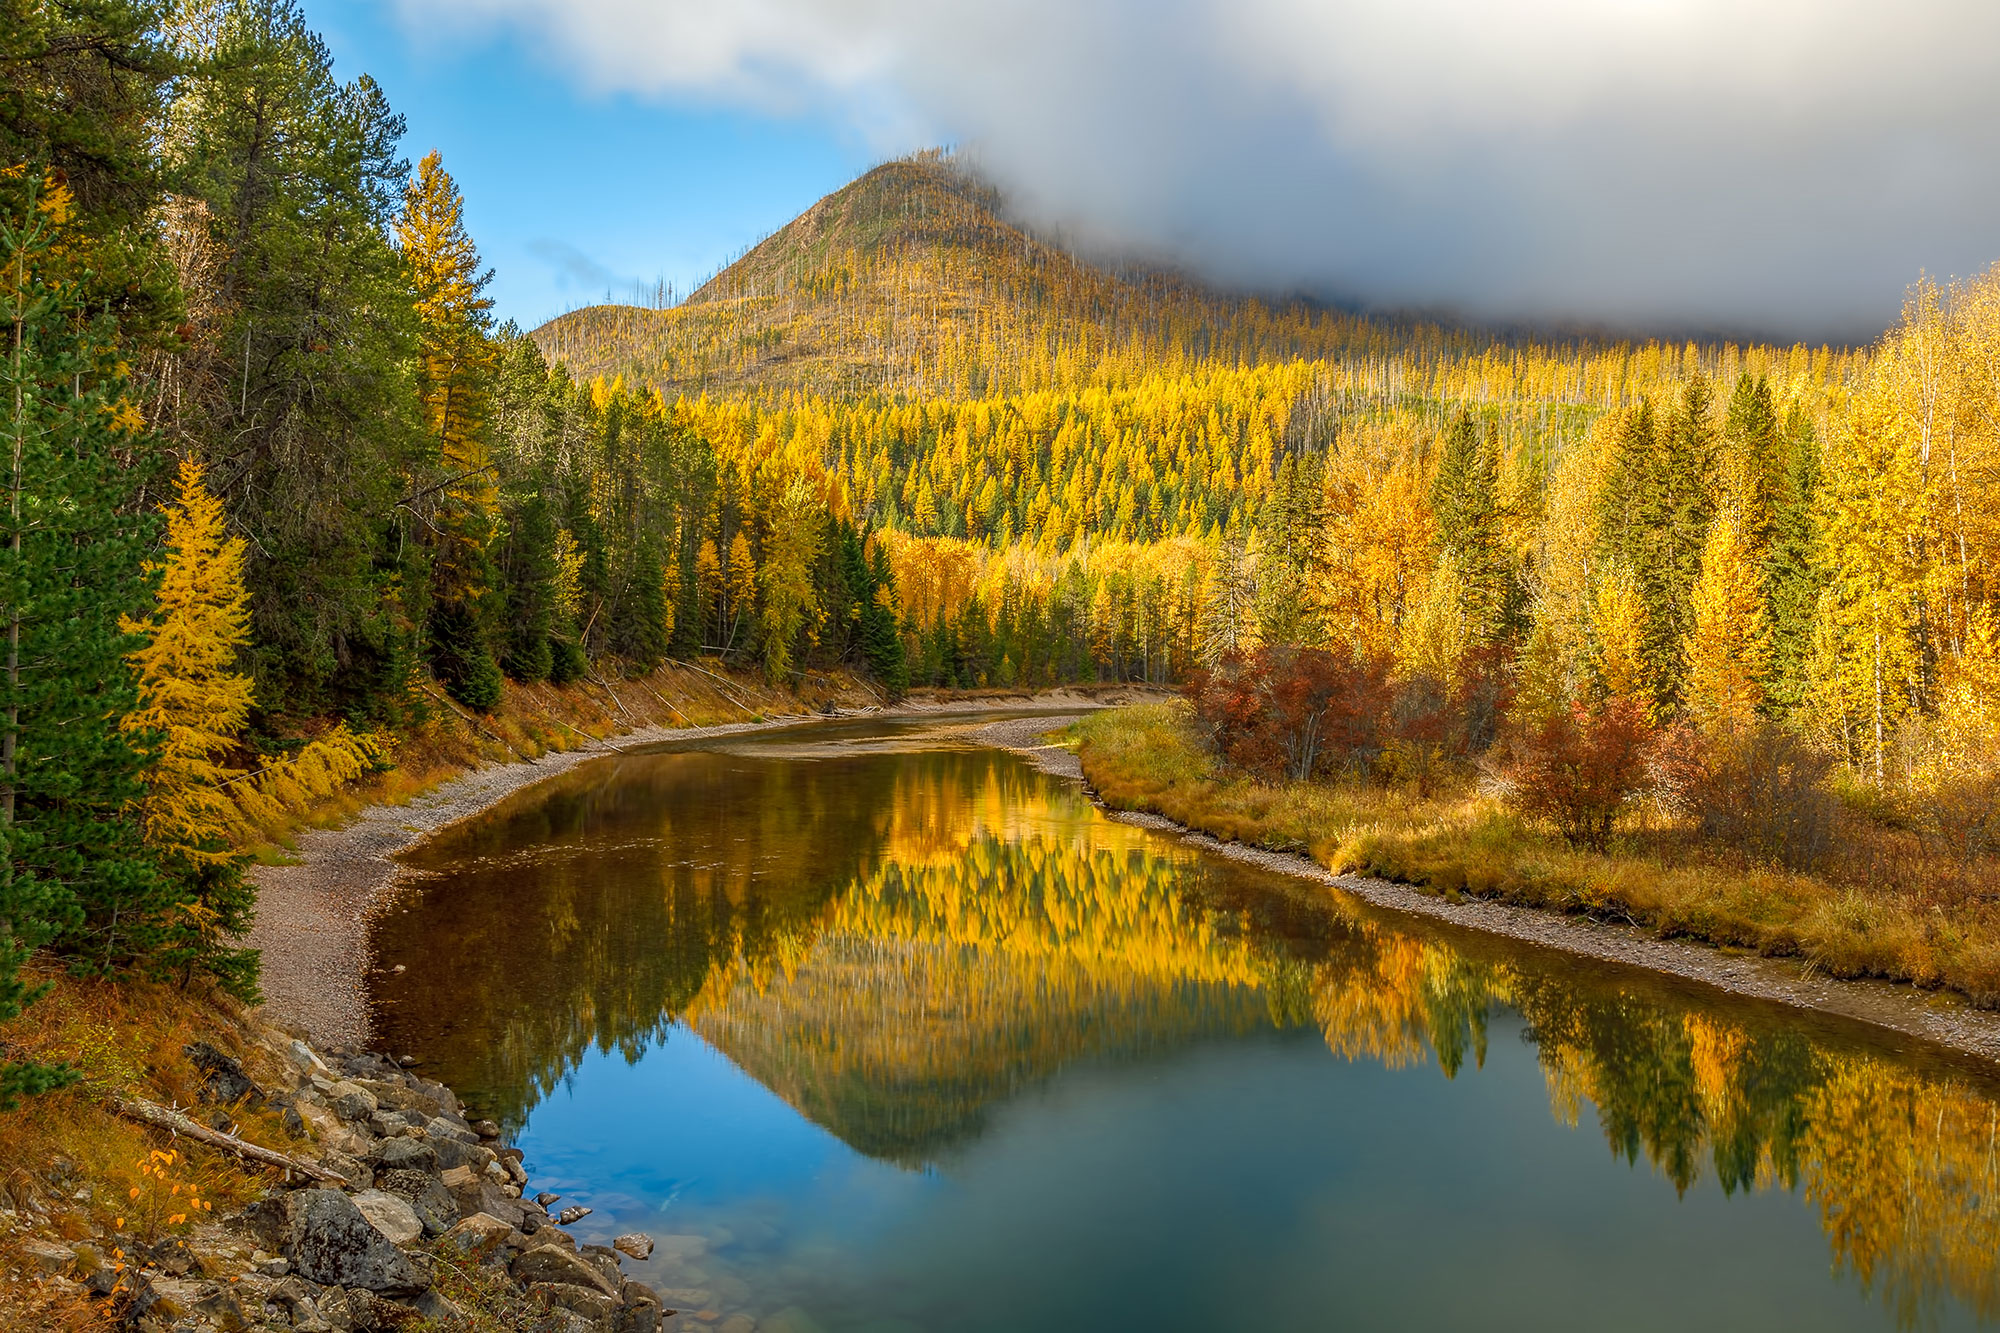 5 Best National Parks for Fall Color in the Western U.S.